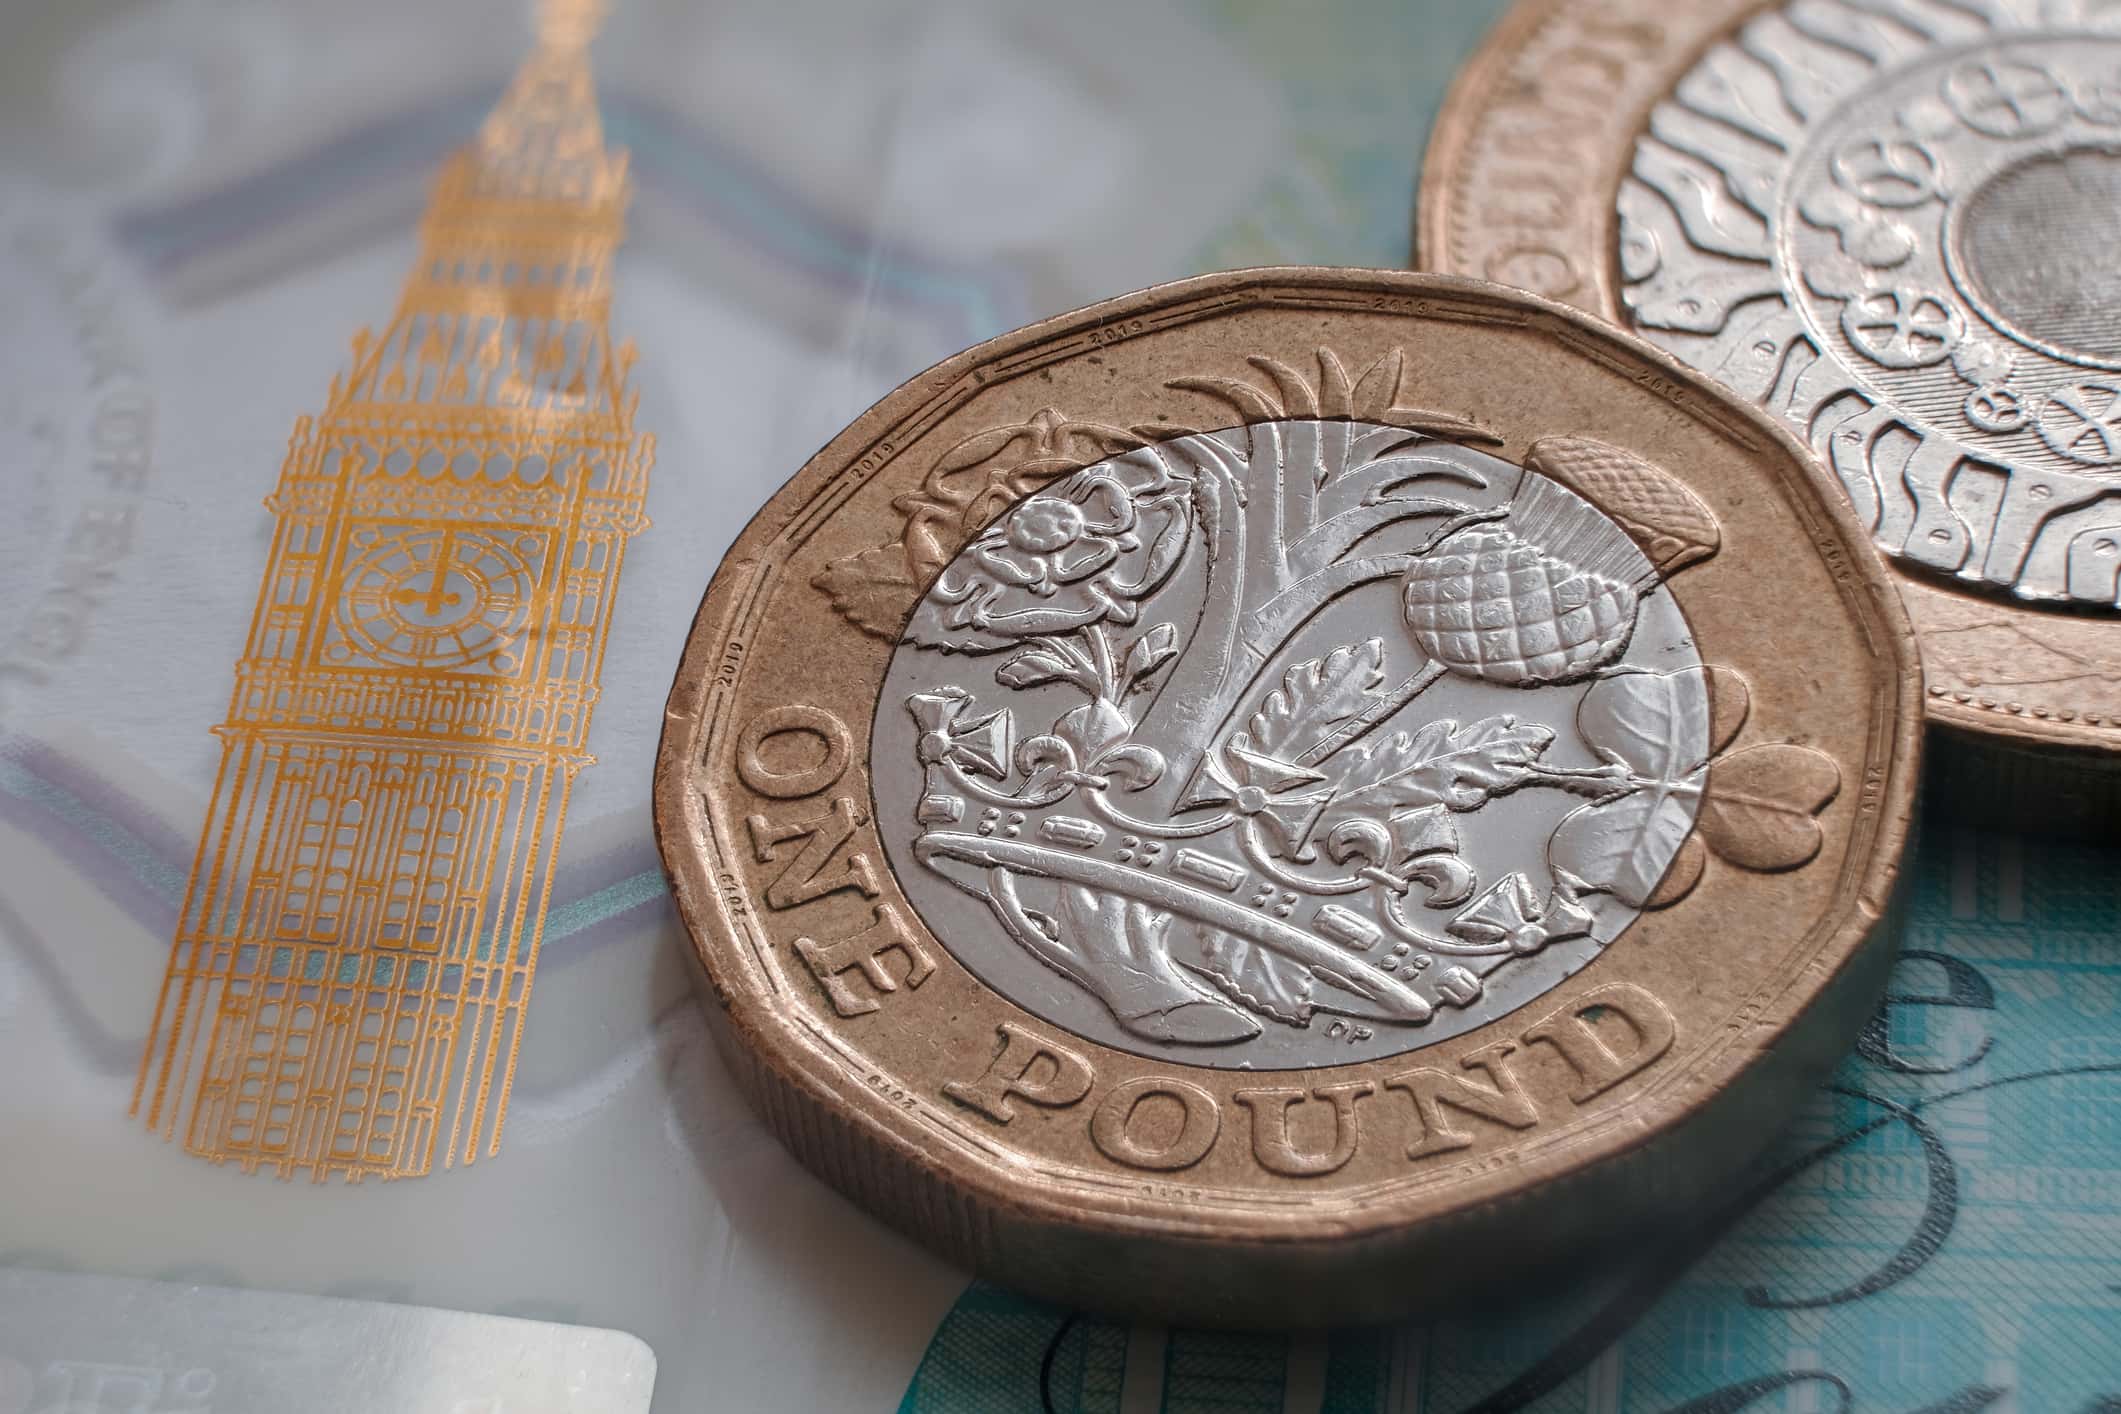 British one pound coin placed on top of polymer 5 Pound banknote with visible Big Ben symbol.